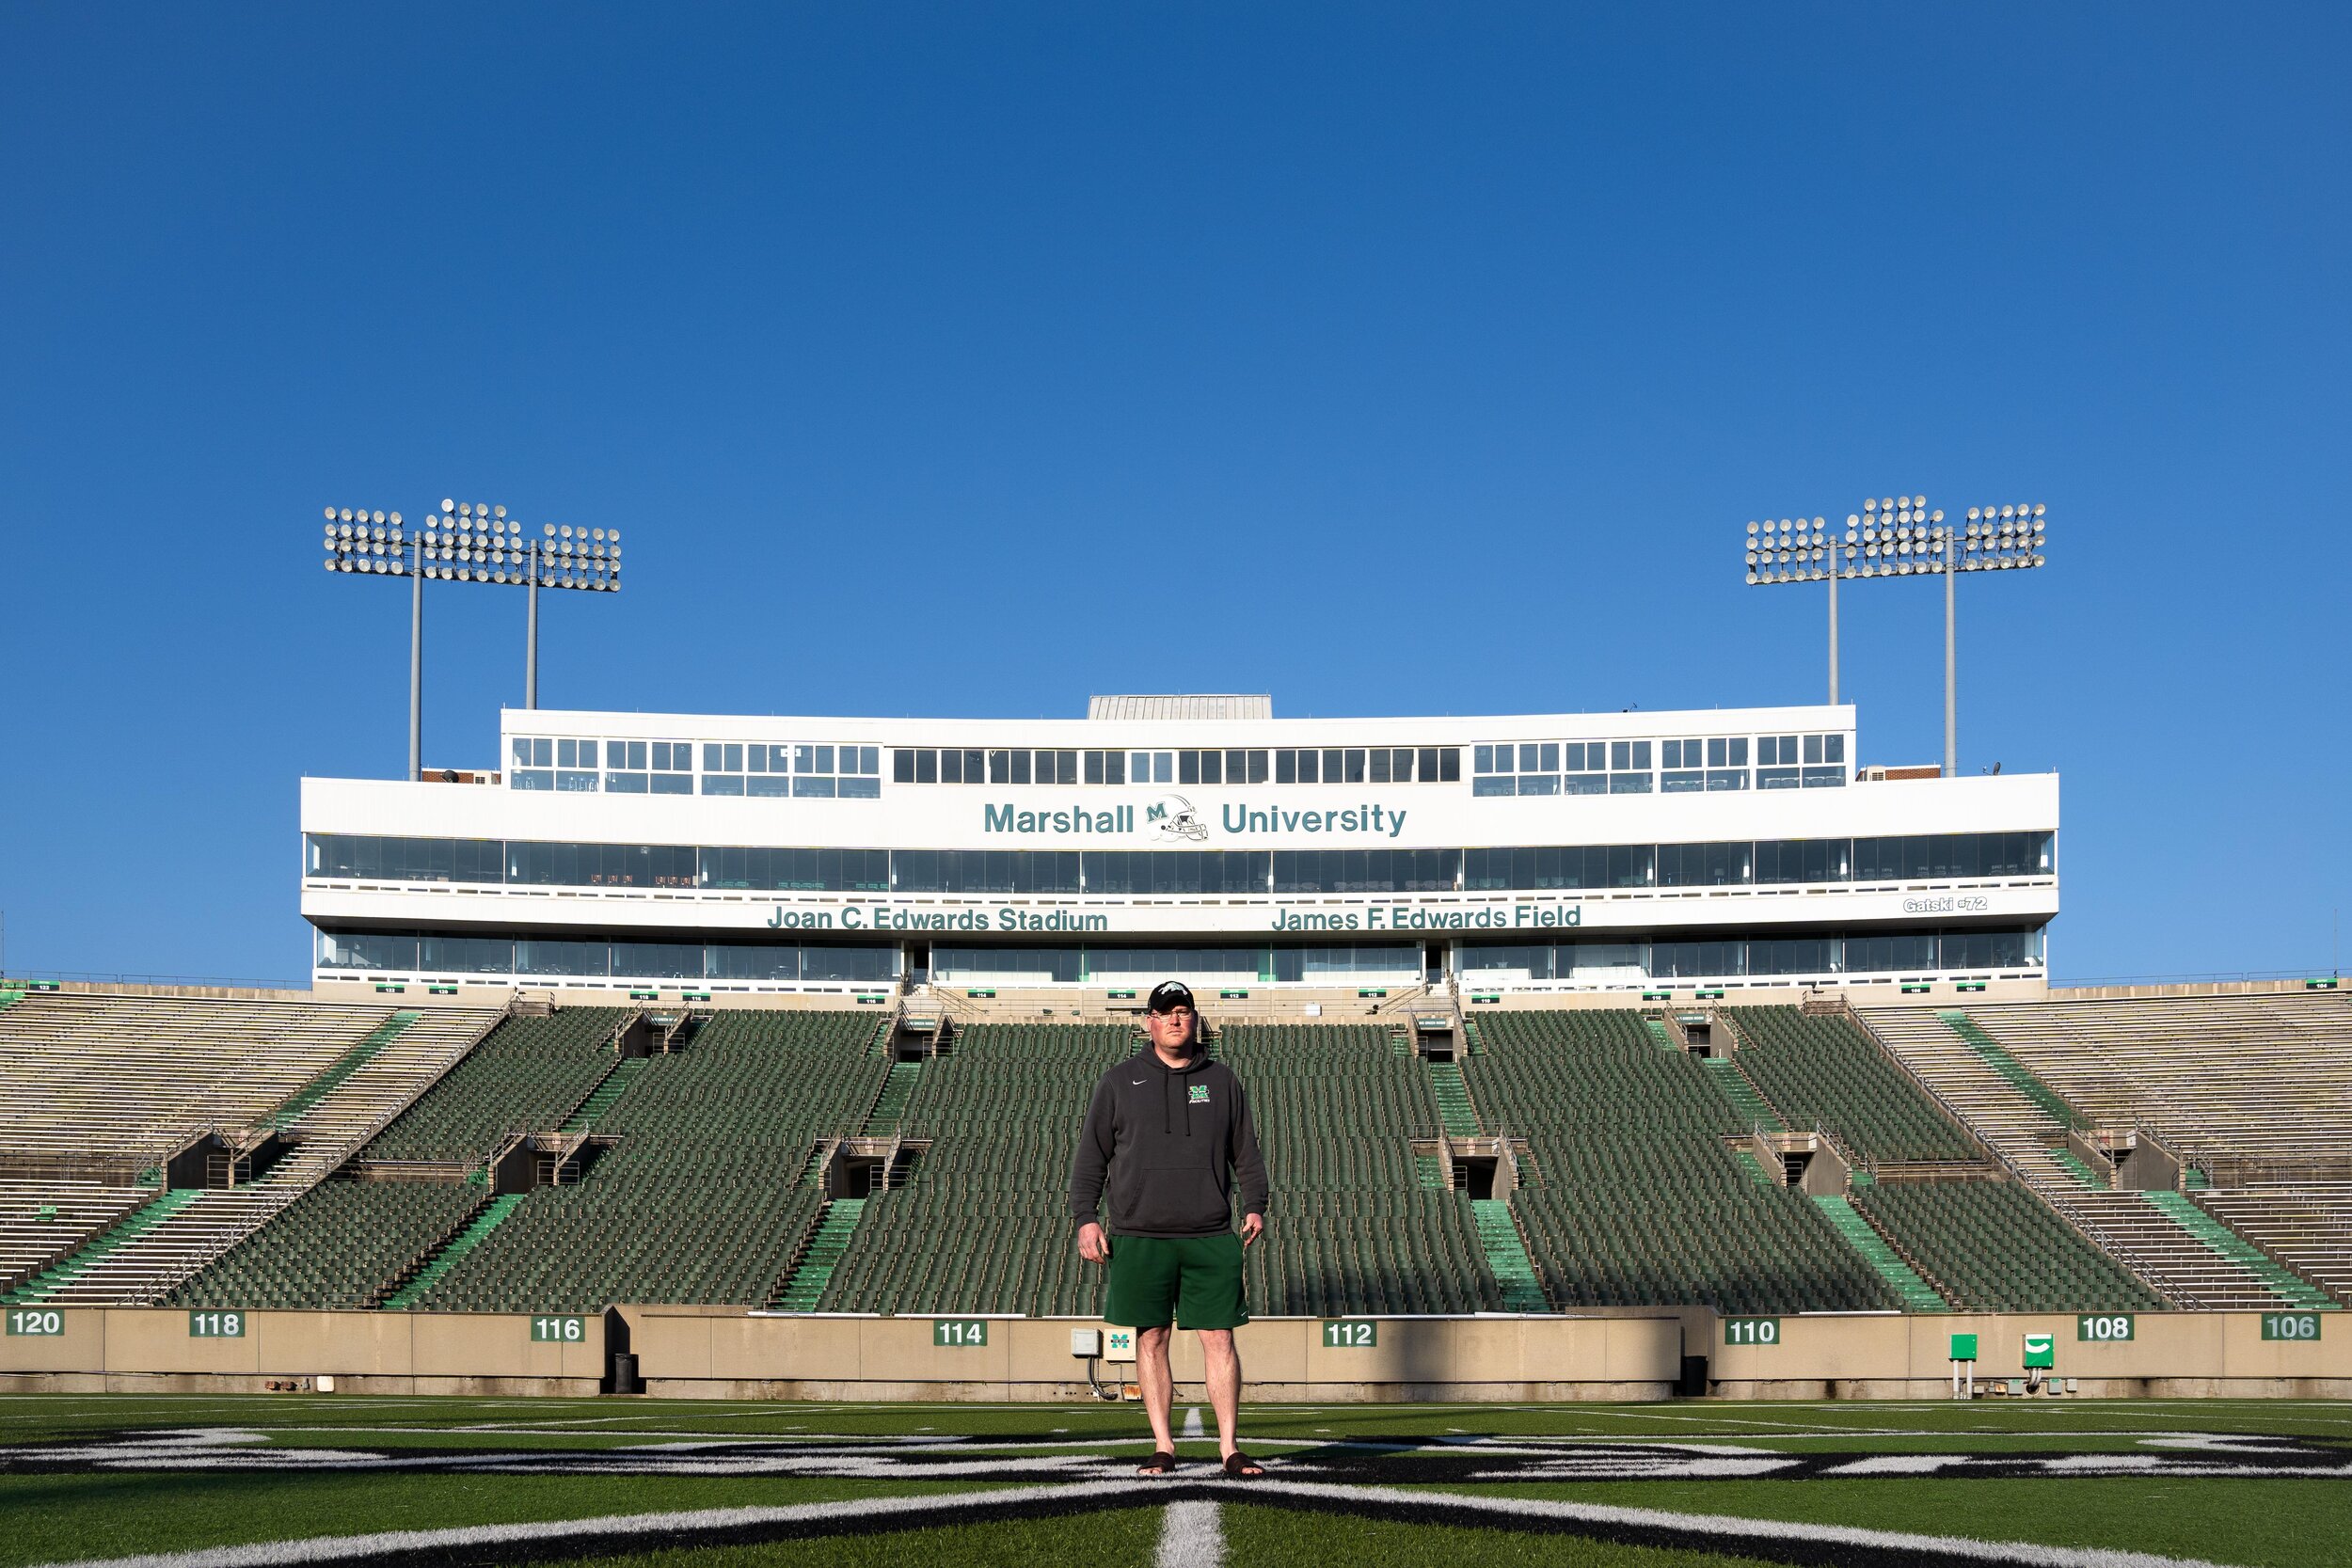  “I went to undergrad and grad school here, and now I’m the associate athletic director, so I have to come check the grounds. The birds sounds nice this morning, this place can also be so peaceful. Full capacity is over 38,000 people.” - Scott | 04/0